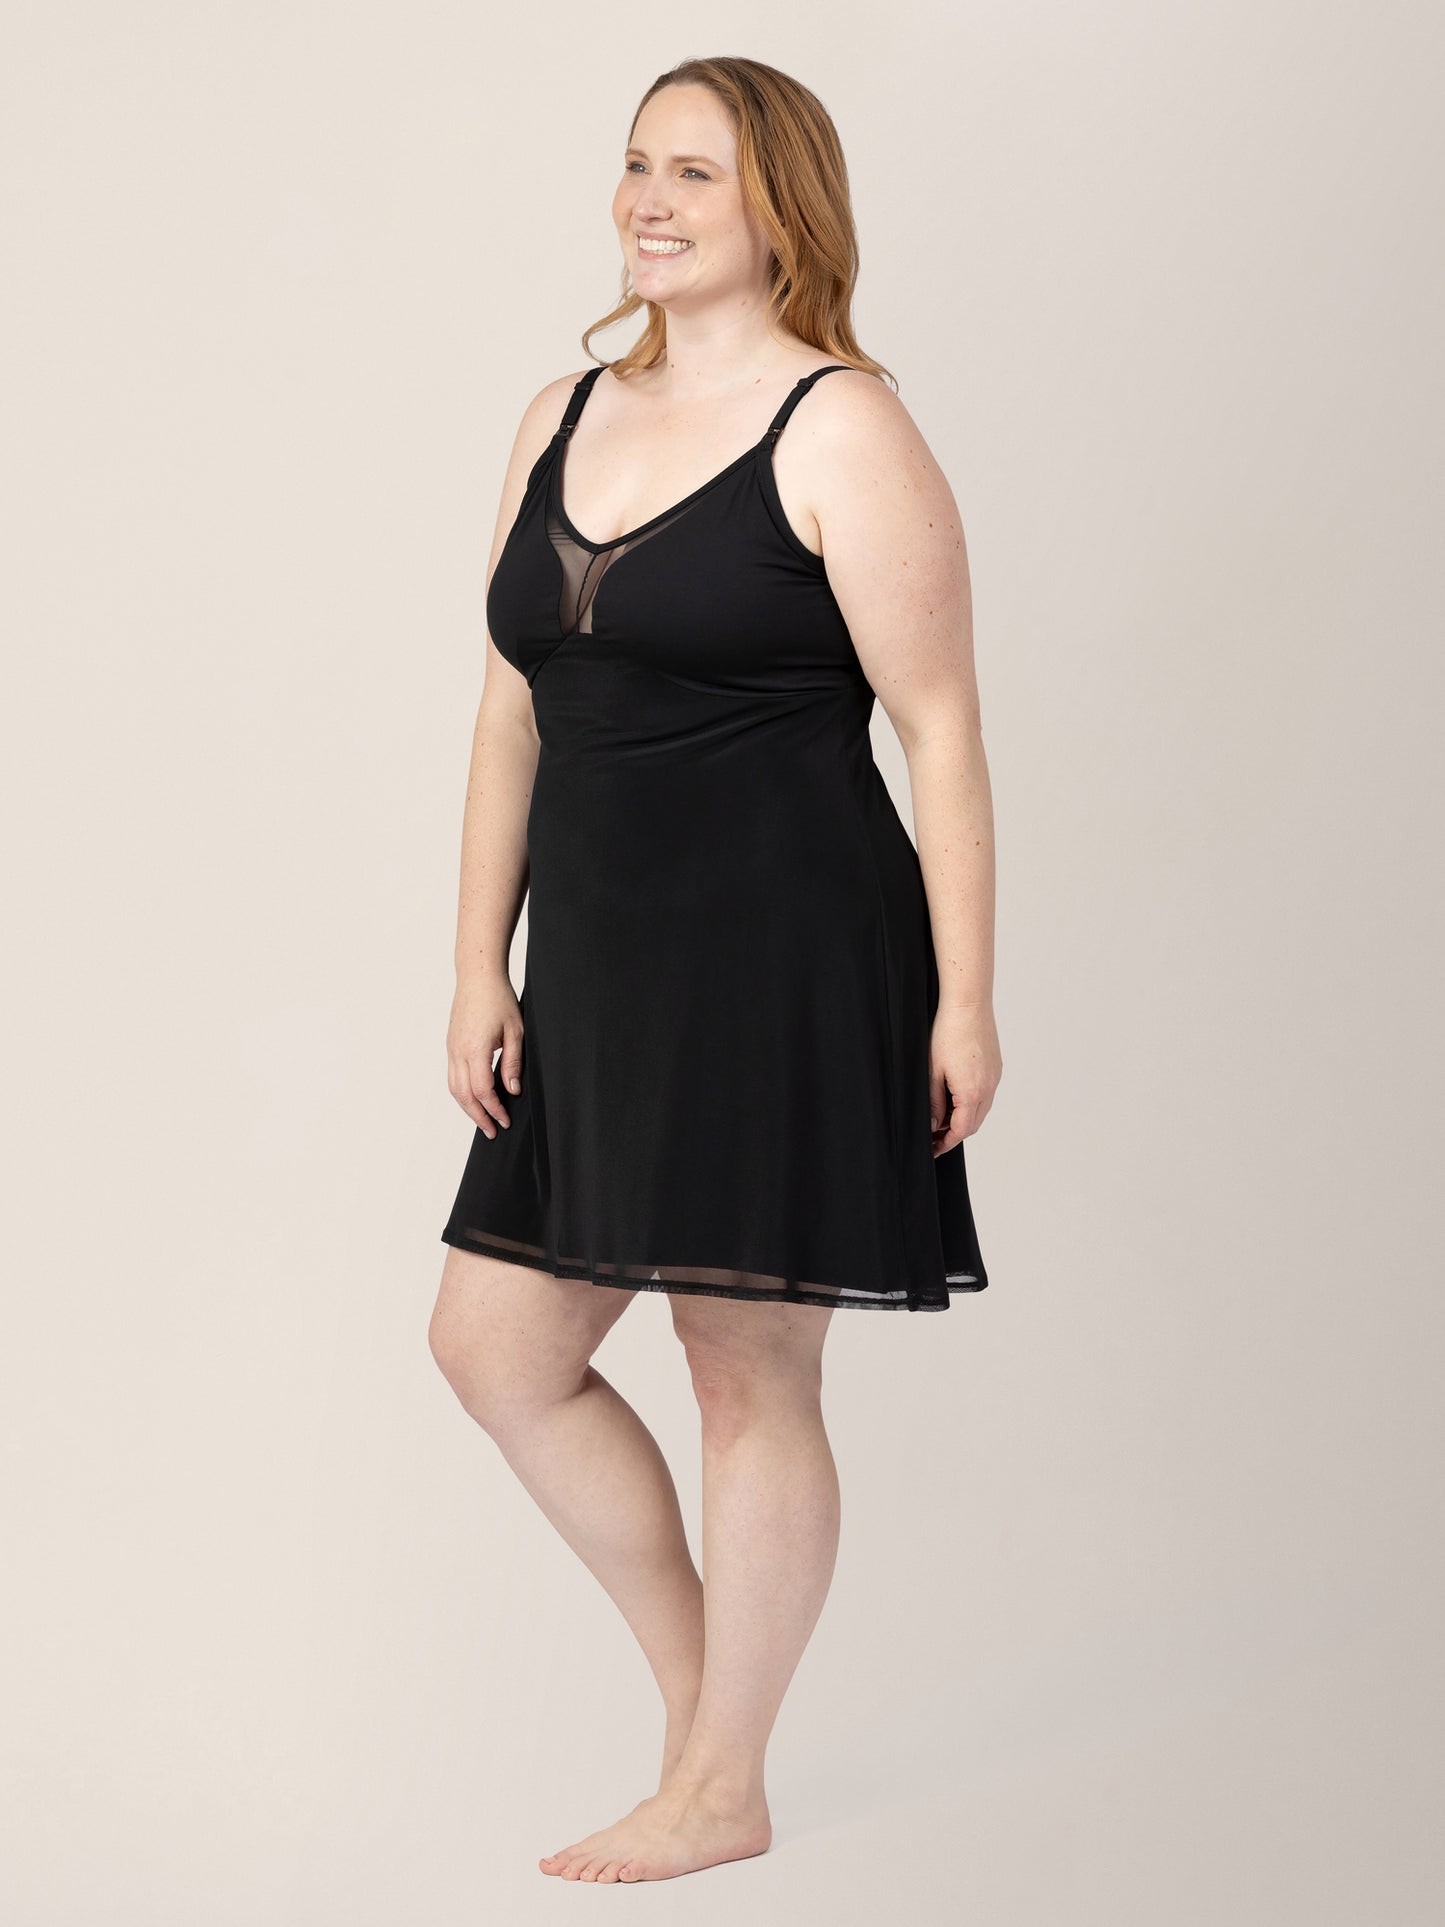 Front/side view of model wearing the Aurora Mesh Nursing Nightgown in black.